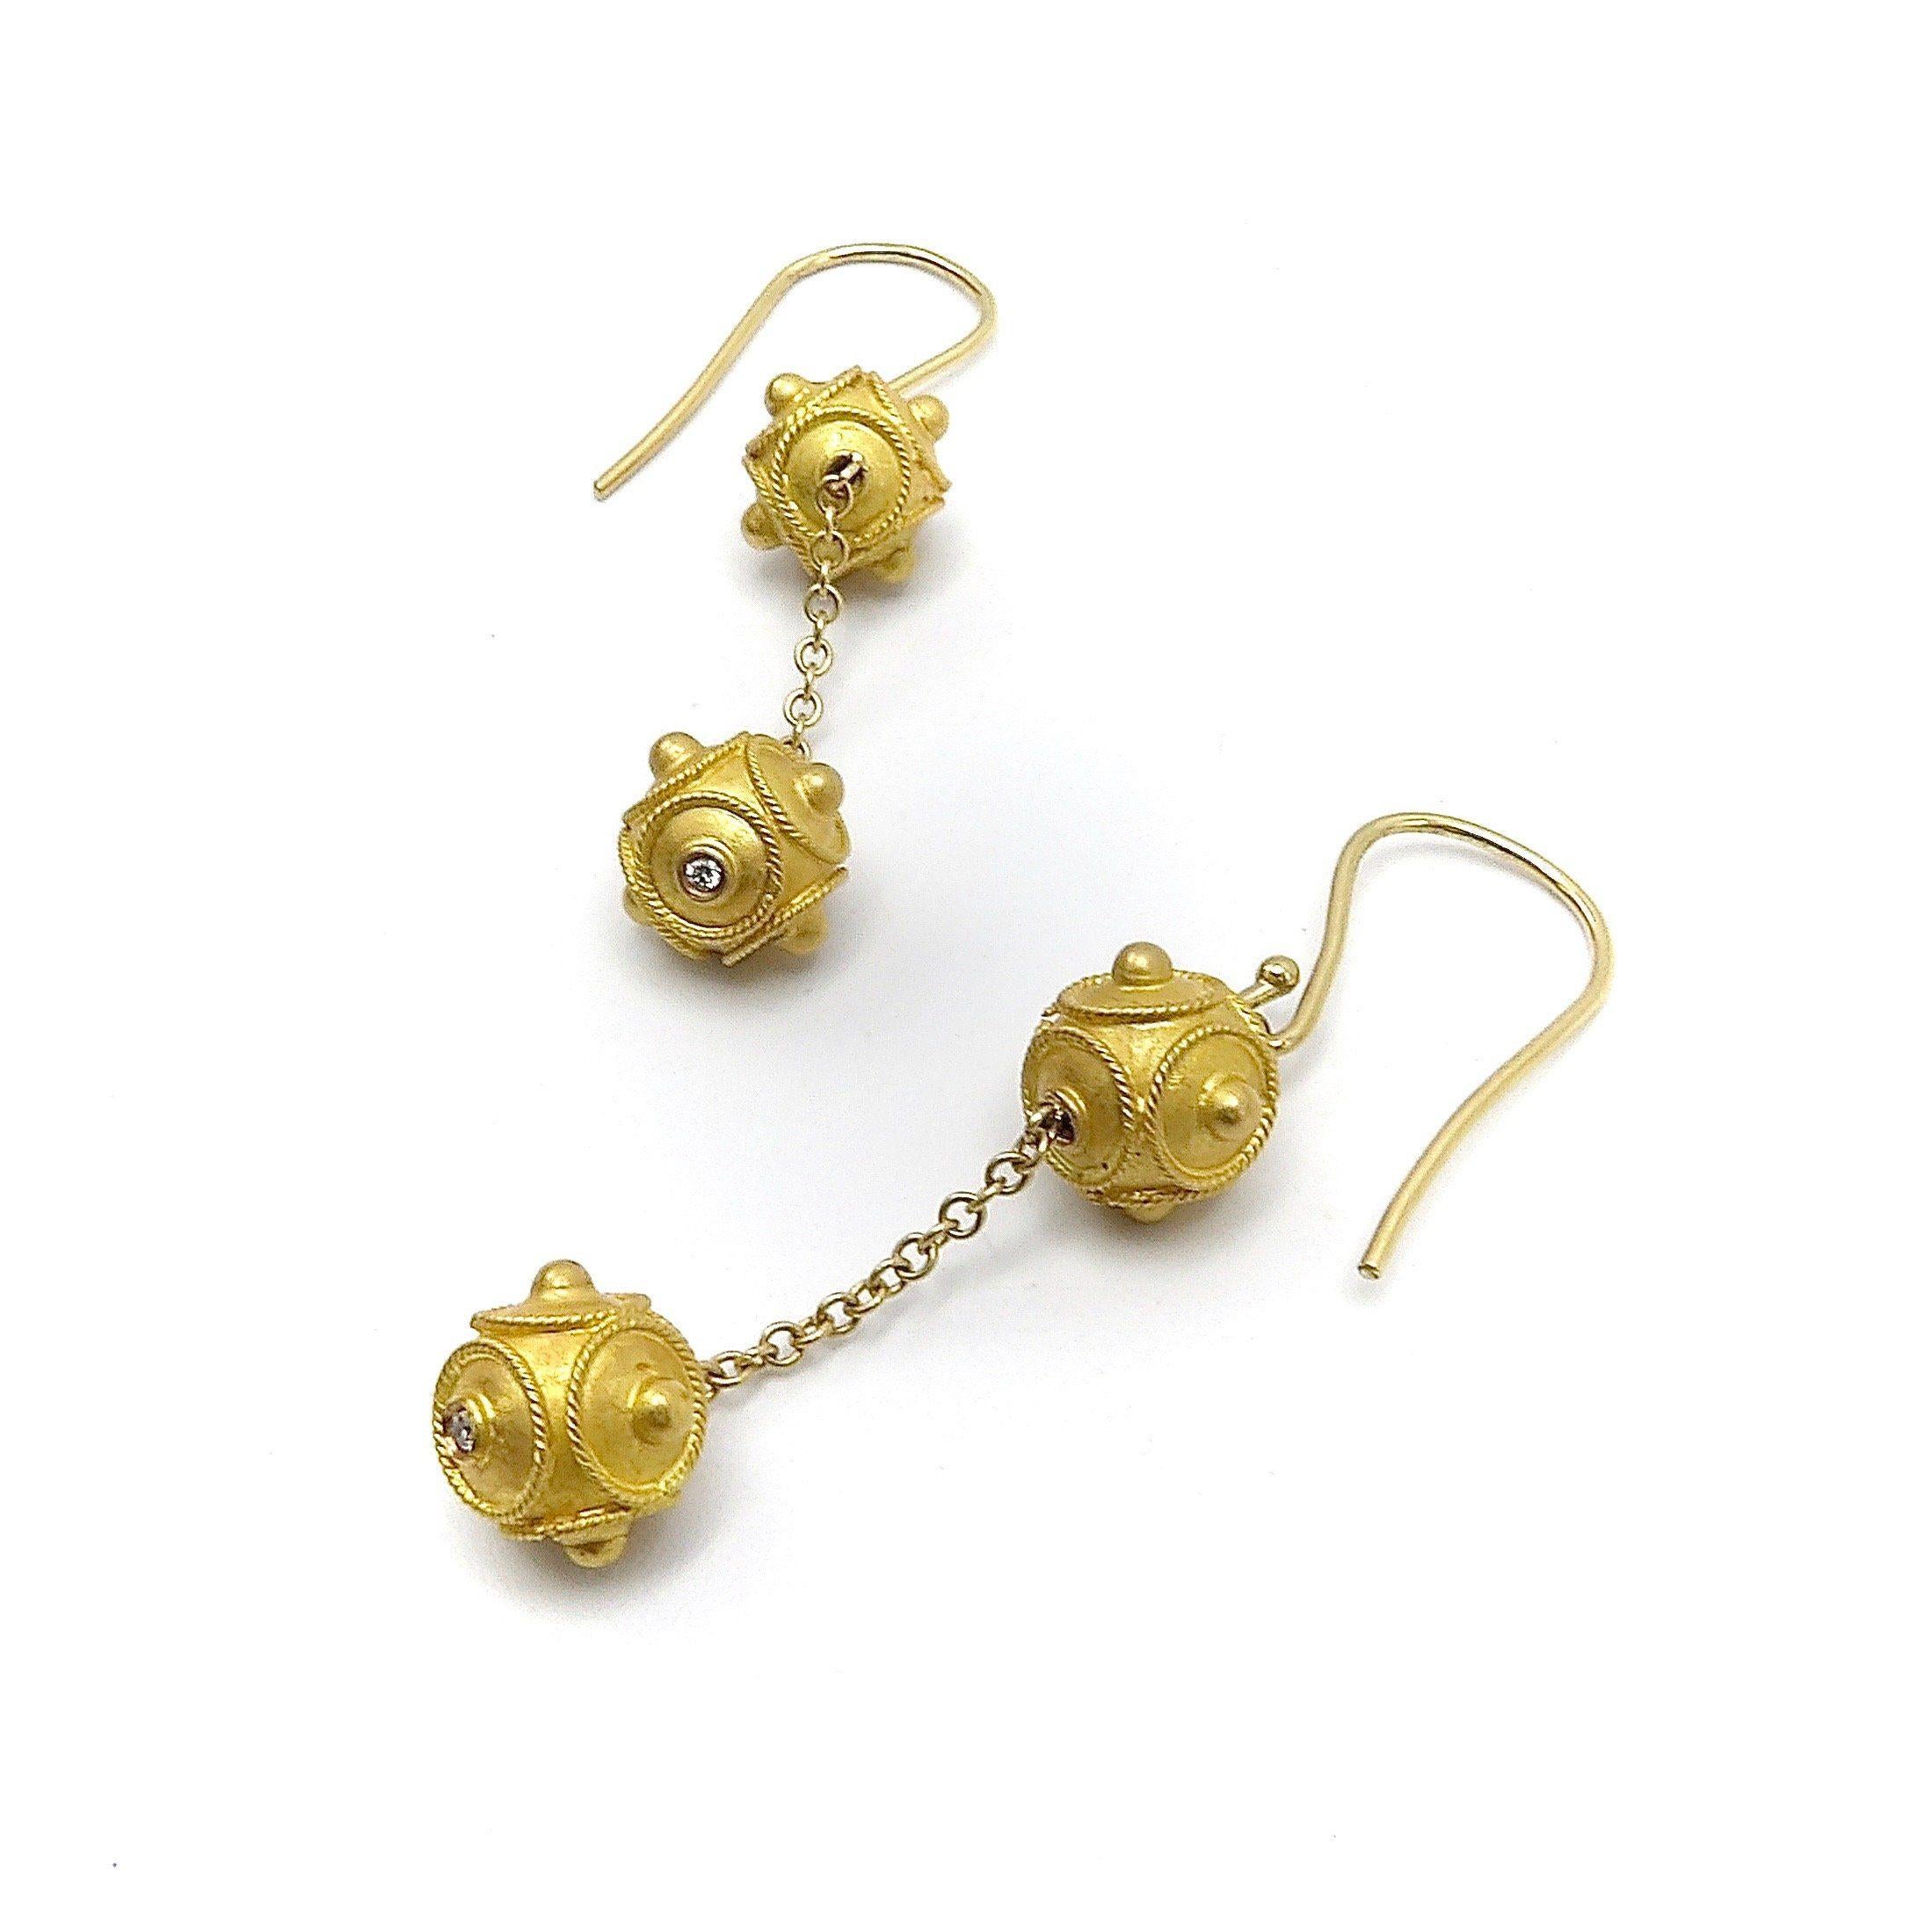 This a stunning pair of 18K Gold Etruscan Revival Double Ball Dangle Earrings. Each earring has two intricately Etruscan Revival twisted wire worked balls or beads of 18K gold. They attach to a shepherd hook ear wire of 18K gold. They are suspended